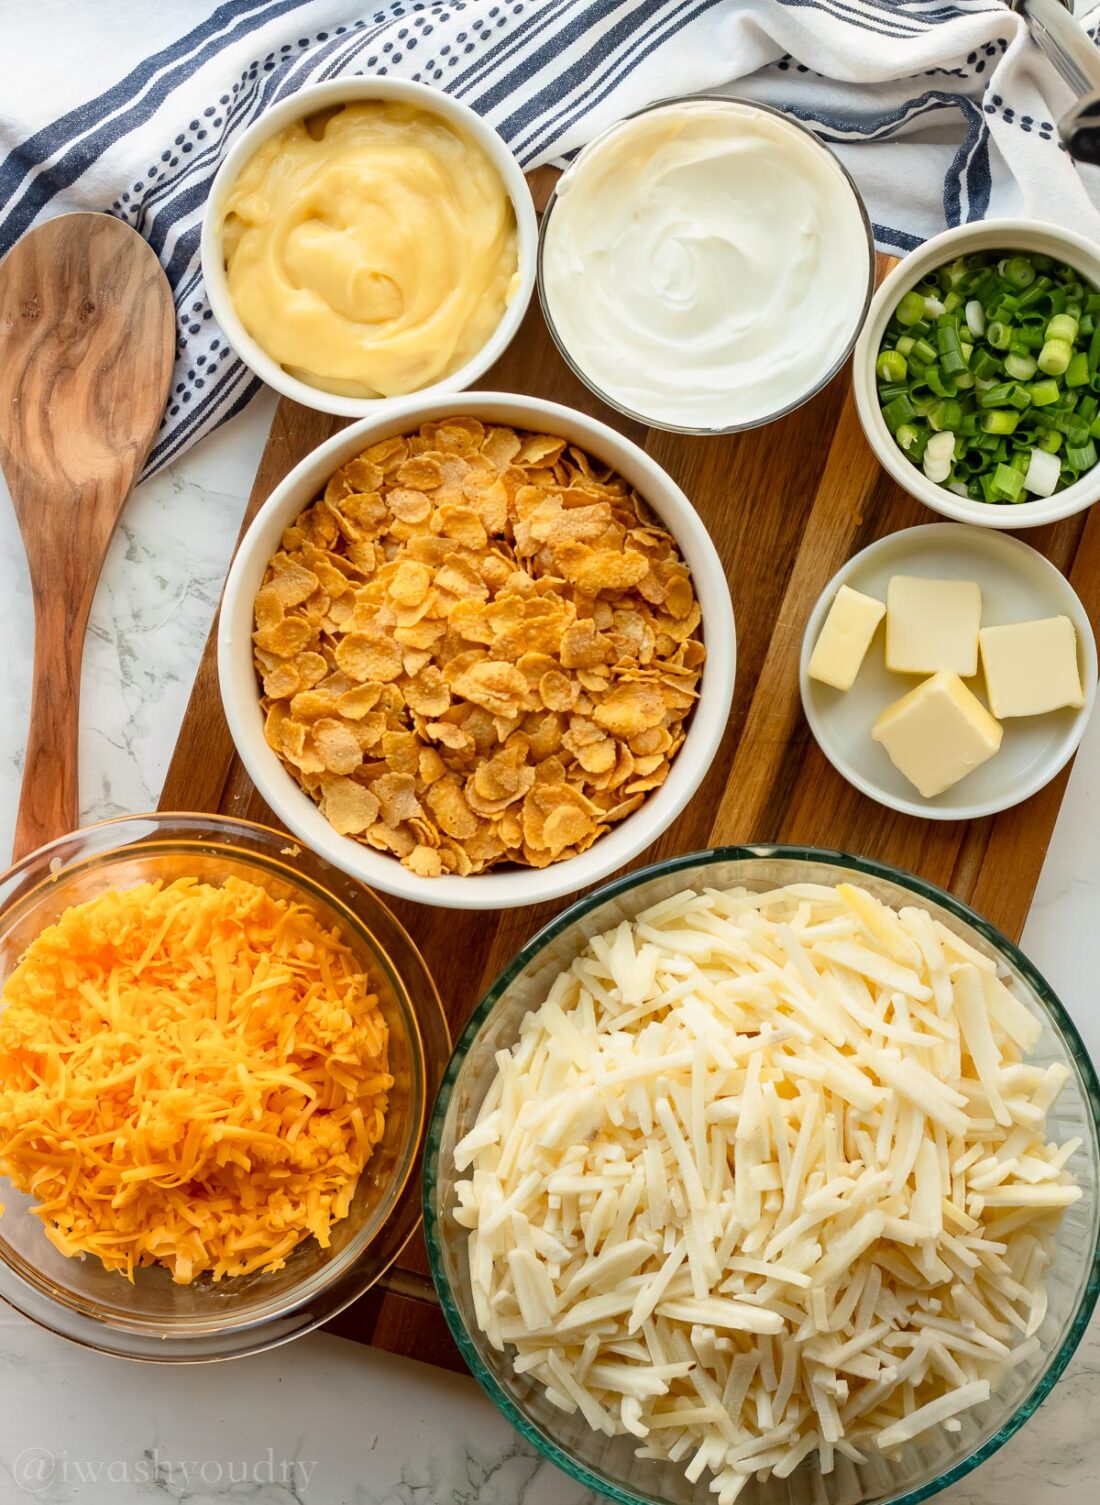 ingredients for casserole potatoes with hashbrowns and onions on wooden surface.